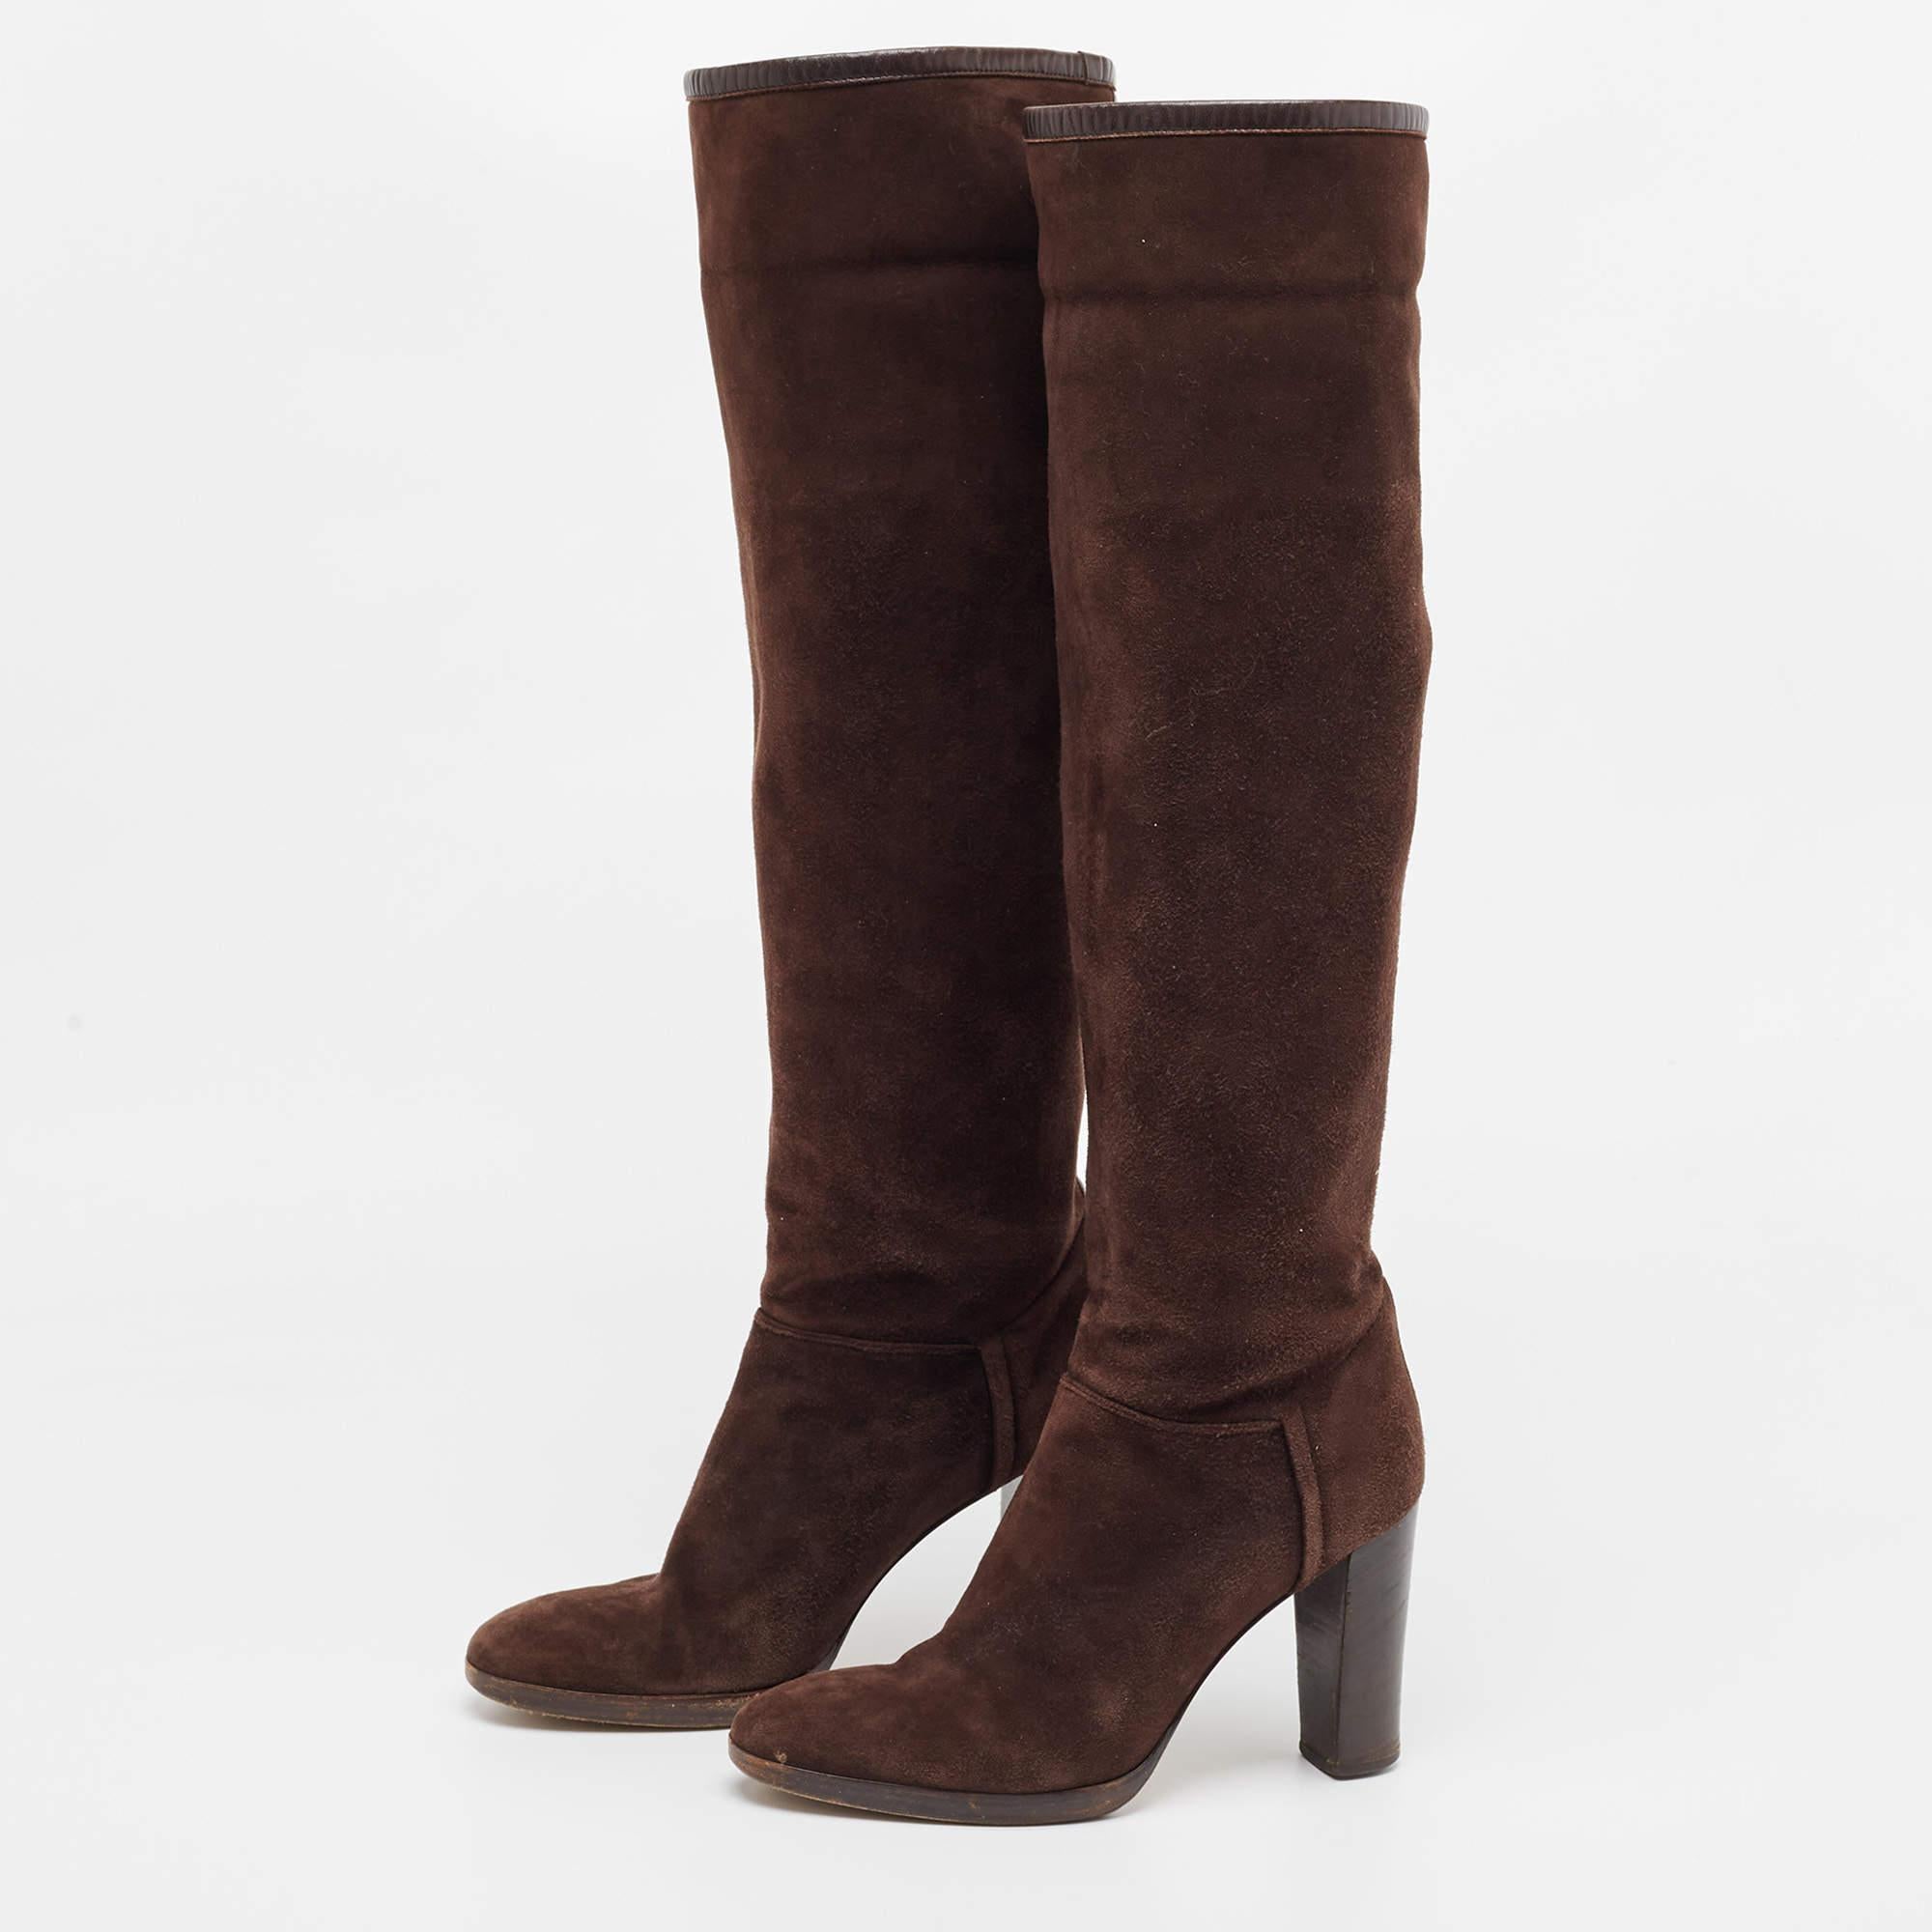 Boots are an essential part of your wardrobe, and these boots, crafted from top-quality materials, are a fine choice. Offering the best of comfort and style, this sturdy-soled pair would be great with skinny jeans for a casual day out!

